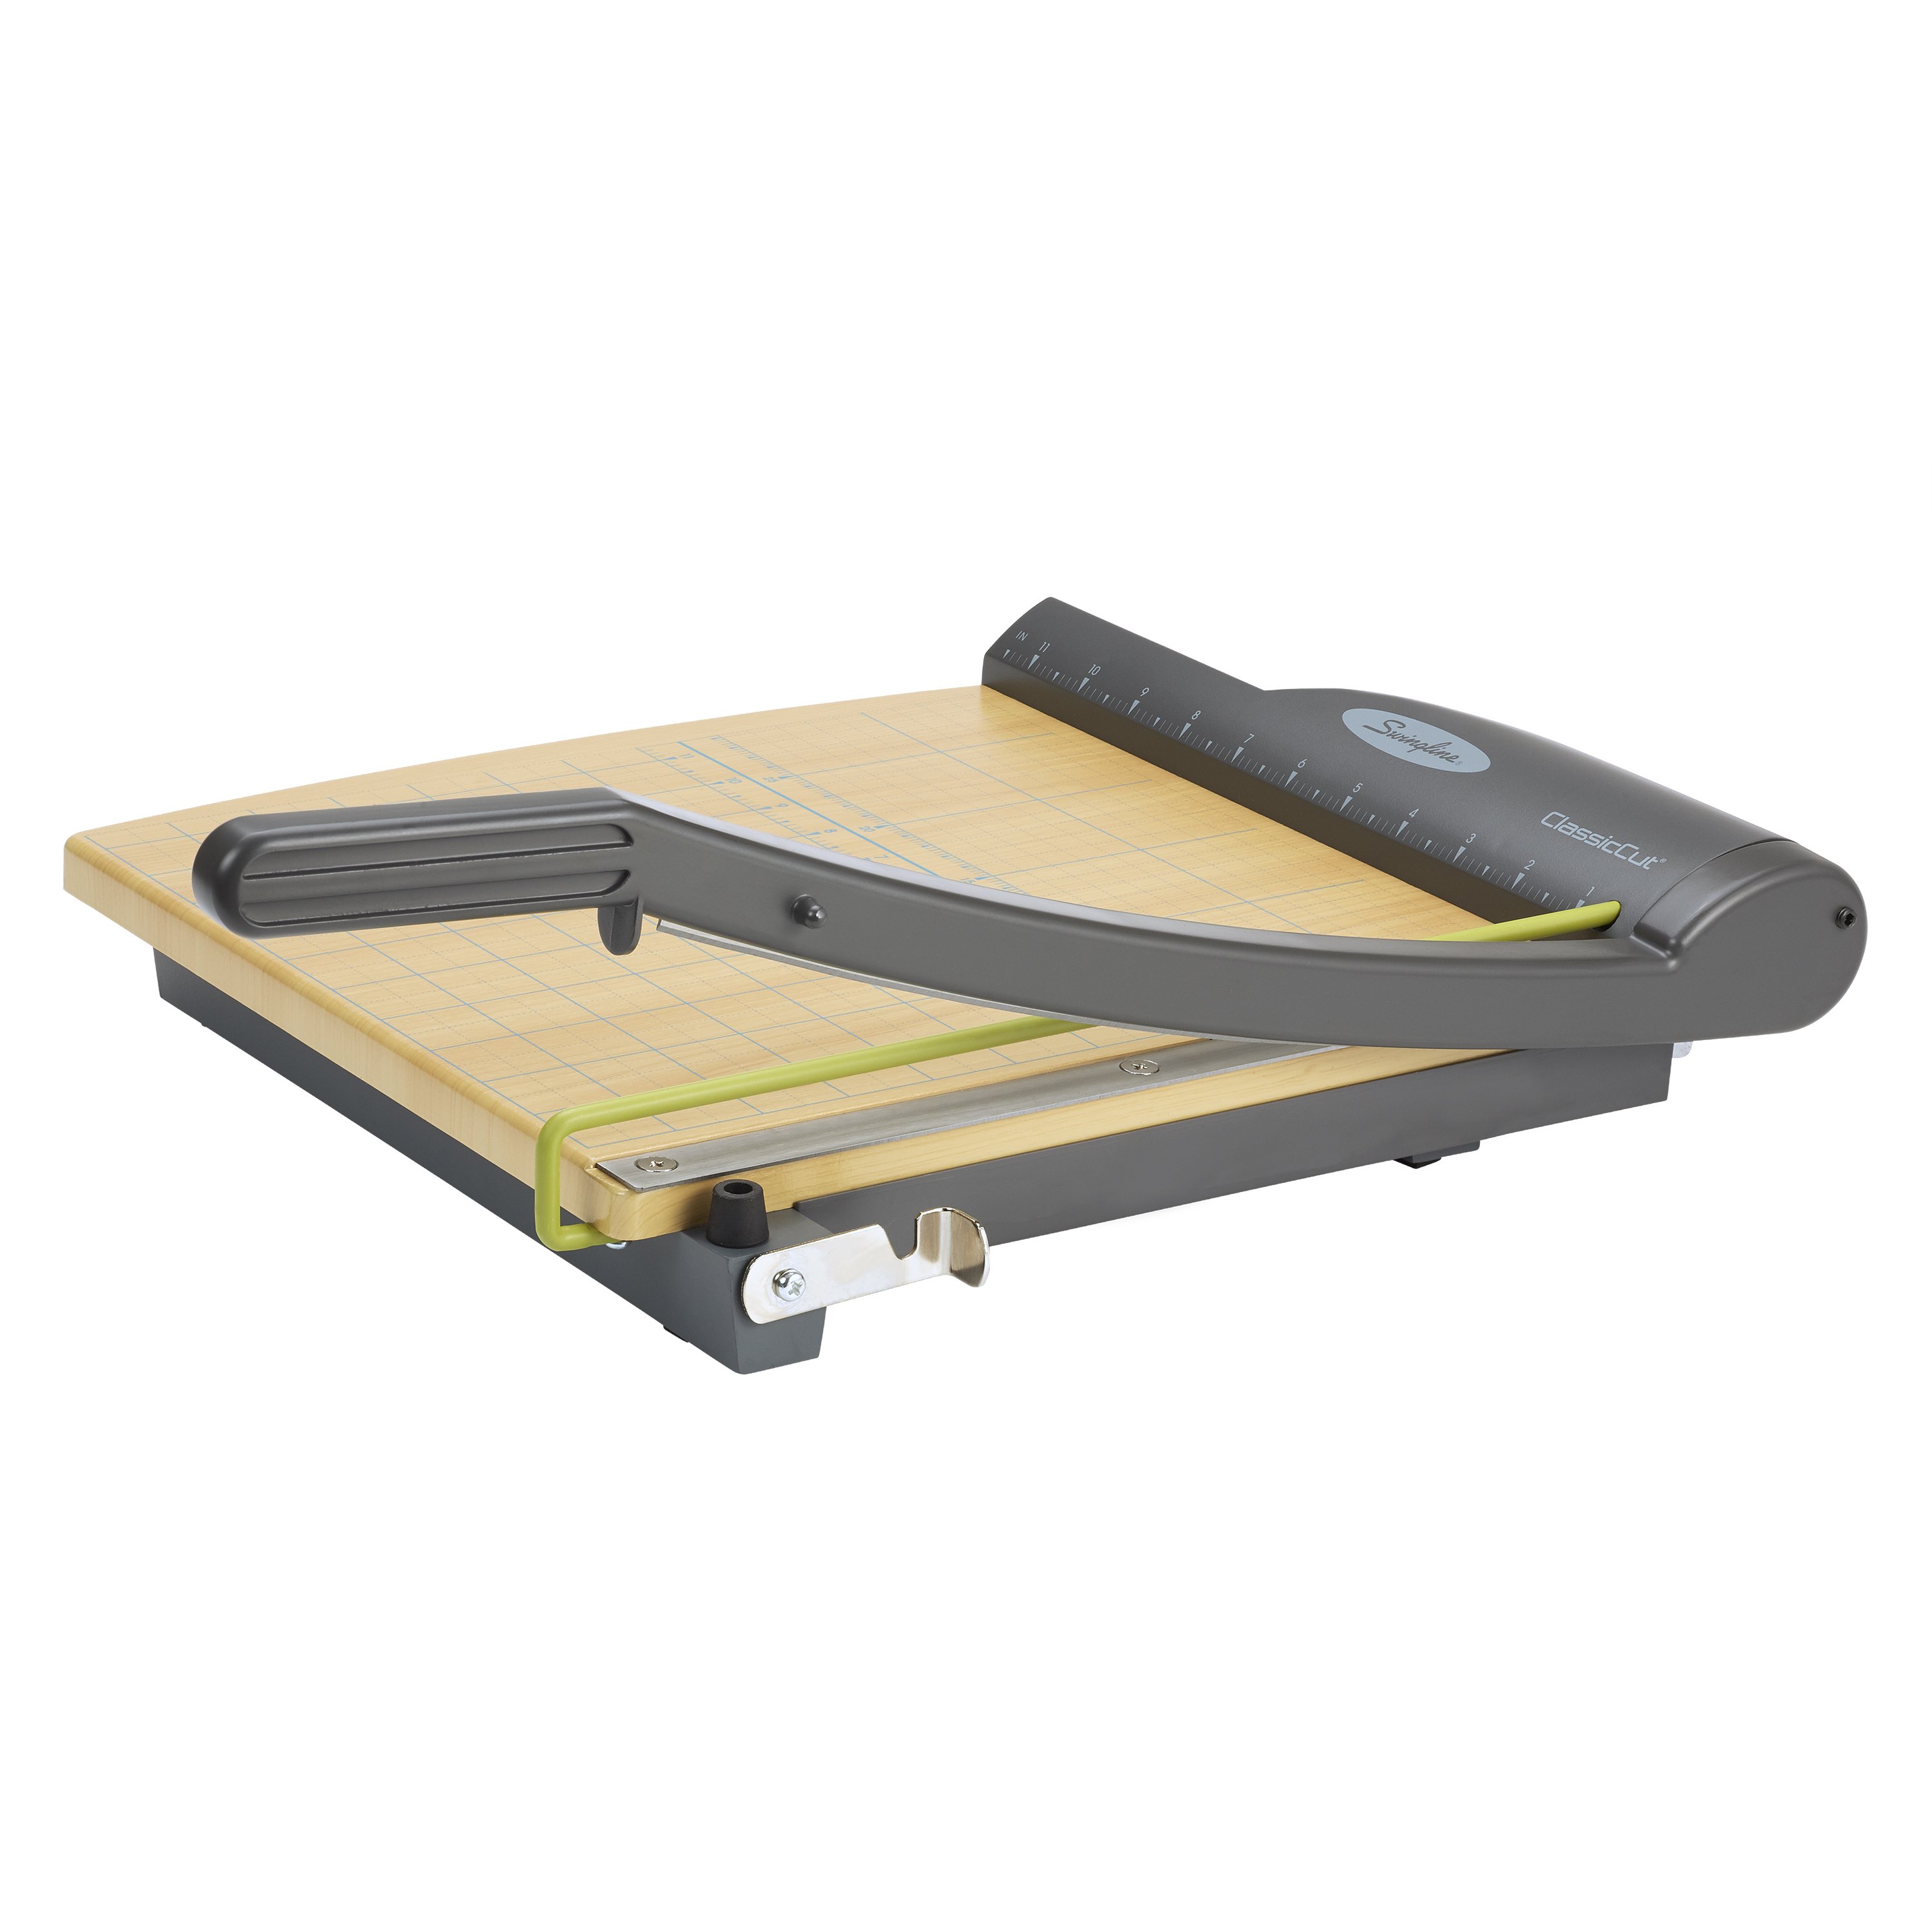 Swingline ClassicCut Pro Guillotine Trimmer, 12" Cut Length, 15 Sheets, Wood (9112A) - image 1 of 11